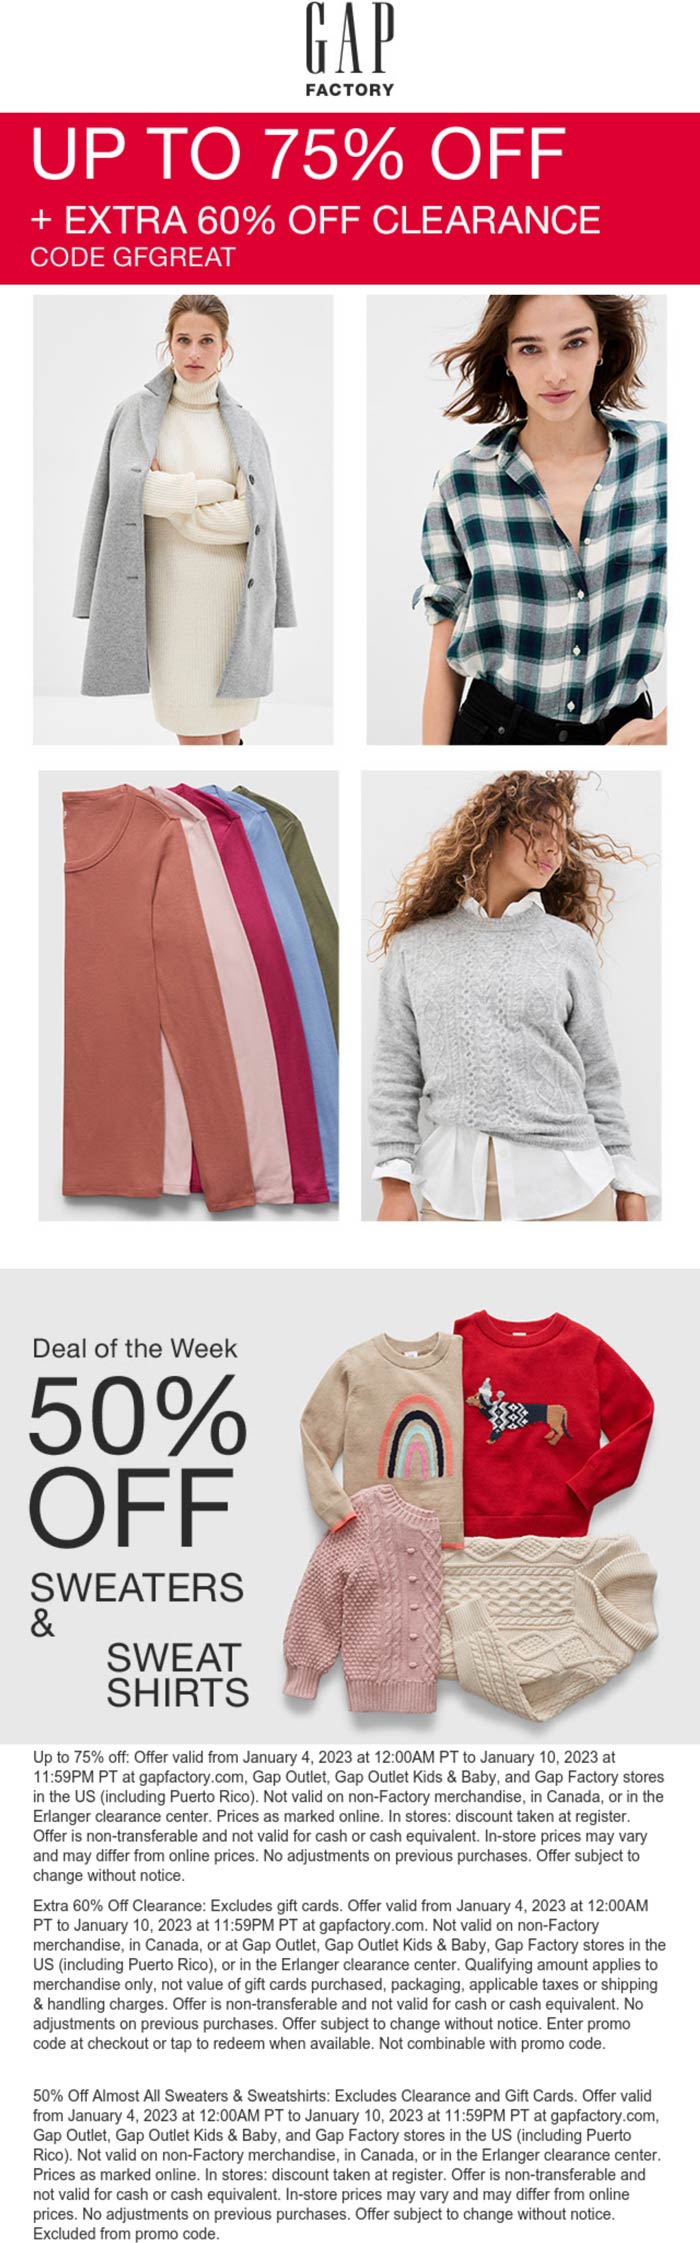 Gap Factory stores Coupon  Extra 60% off clearance & 50% off sweatshirts at Gap Factory #gapfactory 